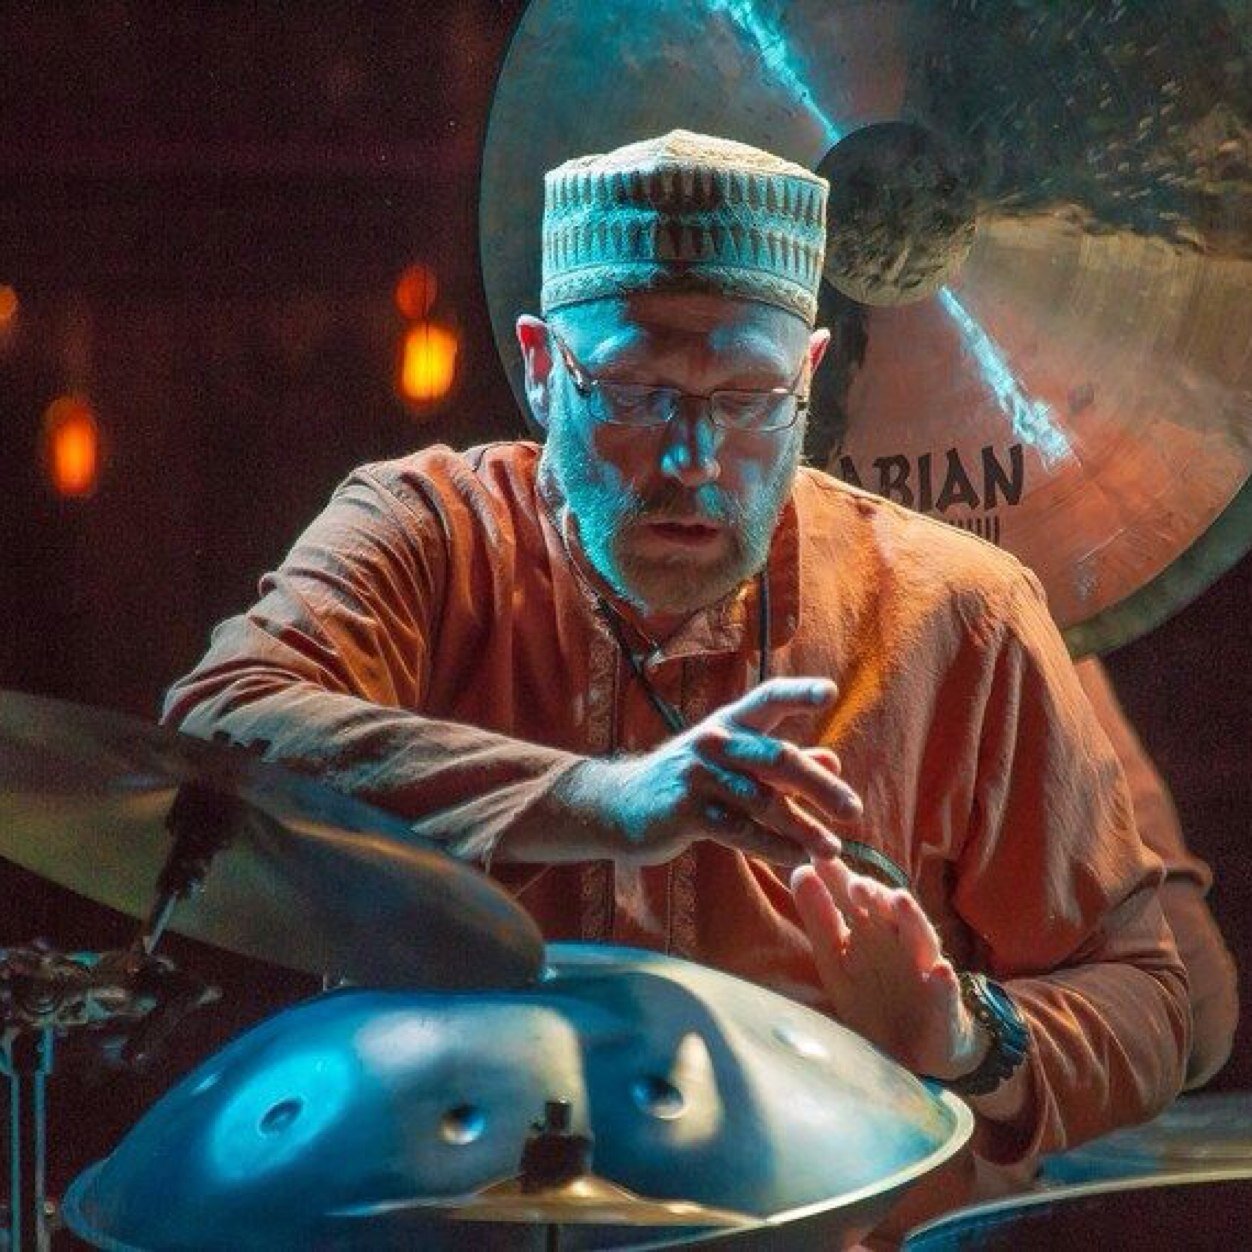 Percussionist, Composer, Sound Designer, Multimedia Artist,  Educator. Modern Percussion From Ancient Traditions. #drum #videoart #worldpercussion #drummer